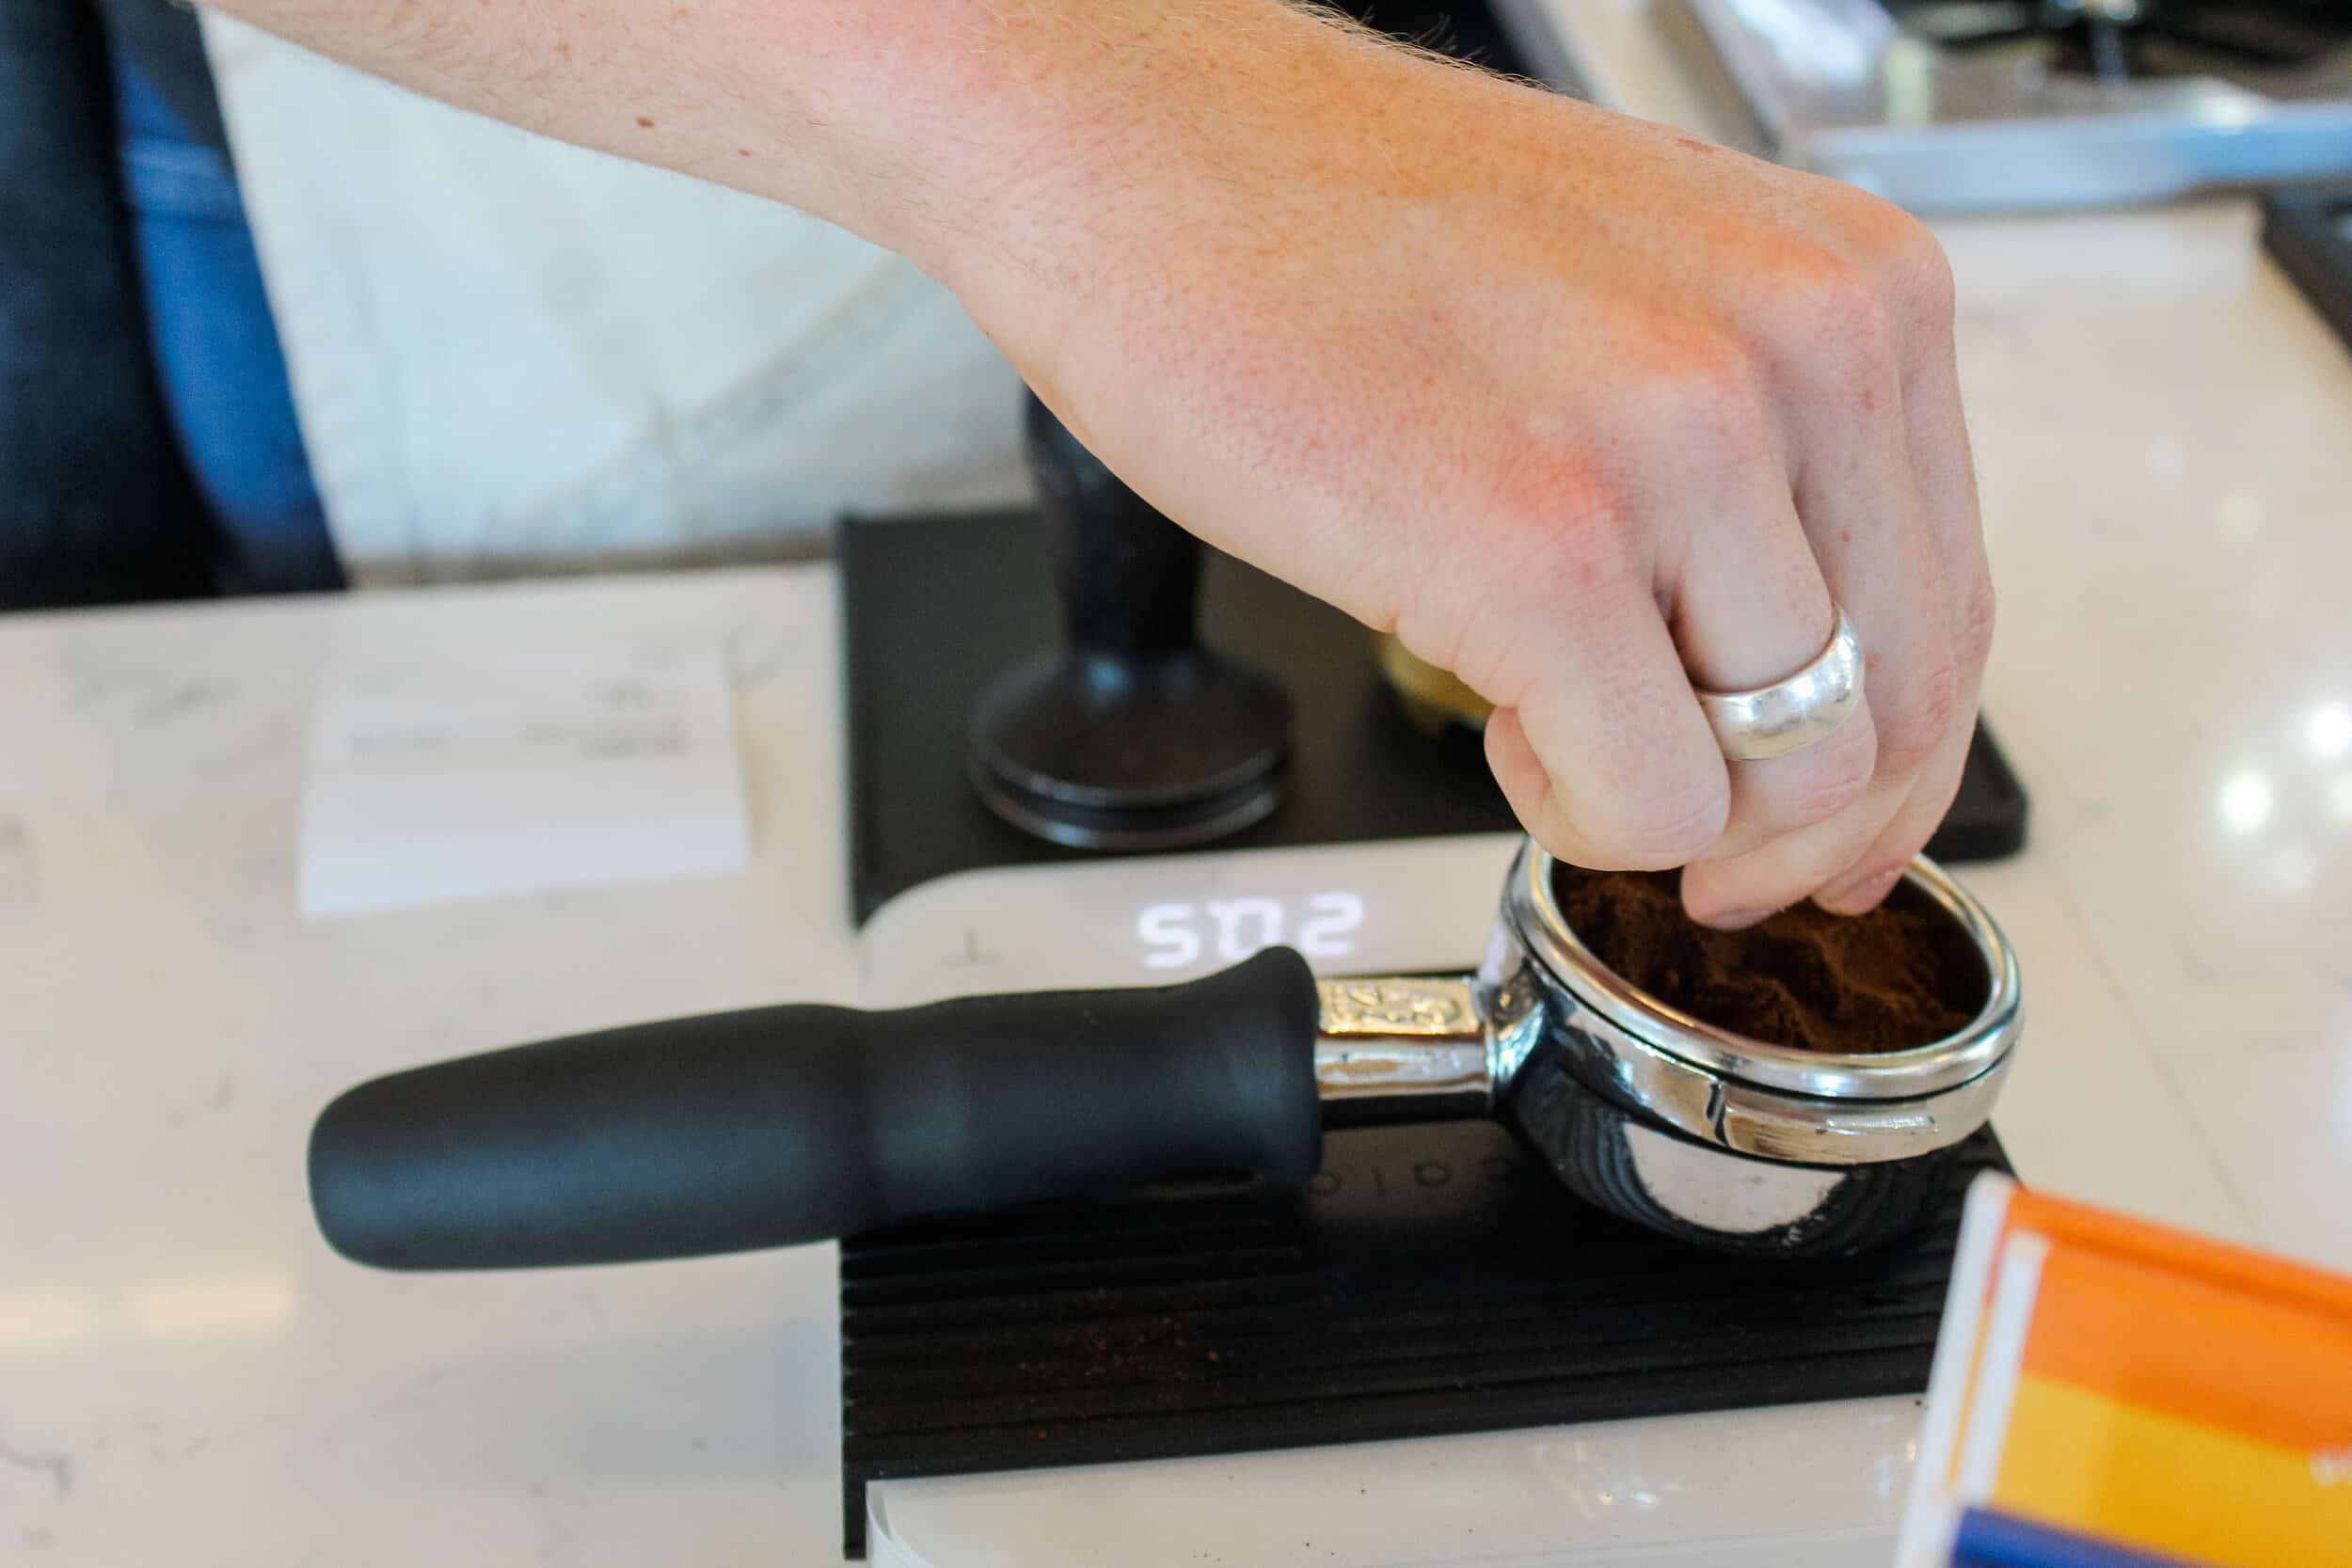 The barista needs to weigh the espresso to get precise measurements of ingredients.